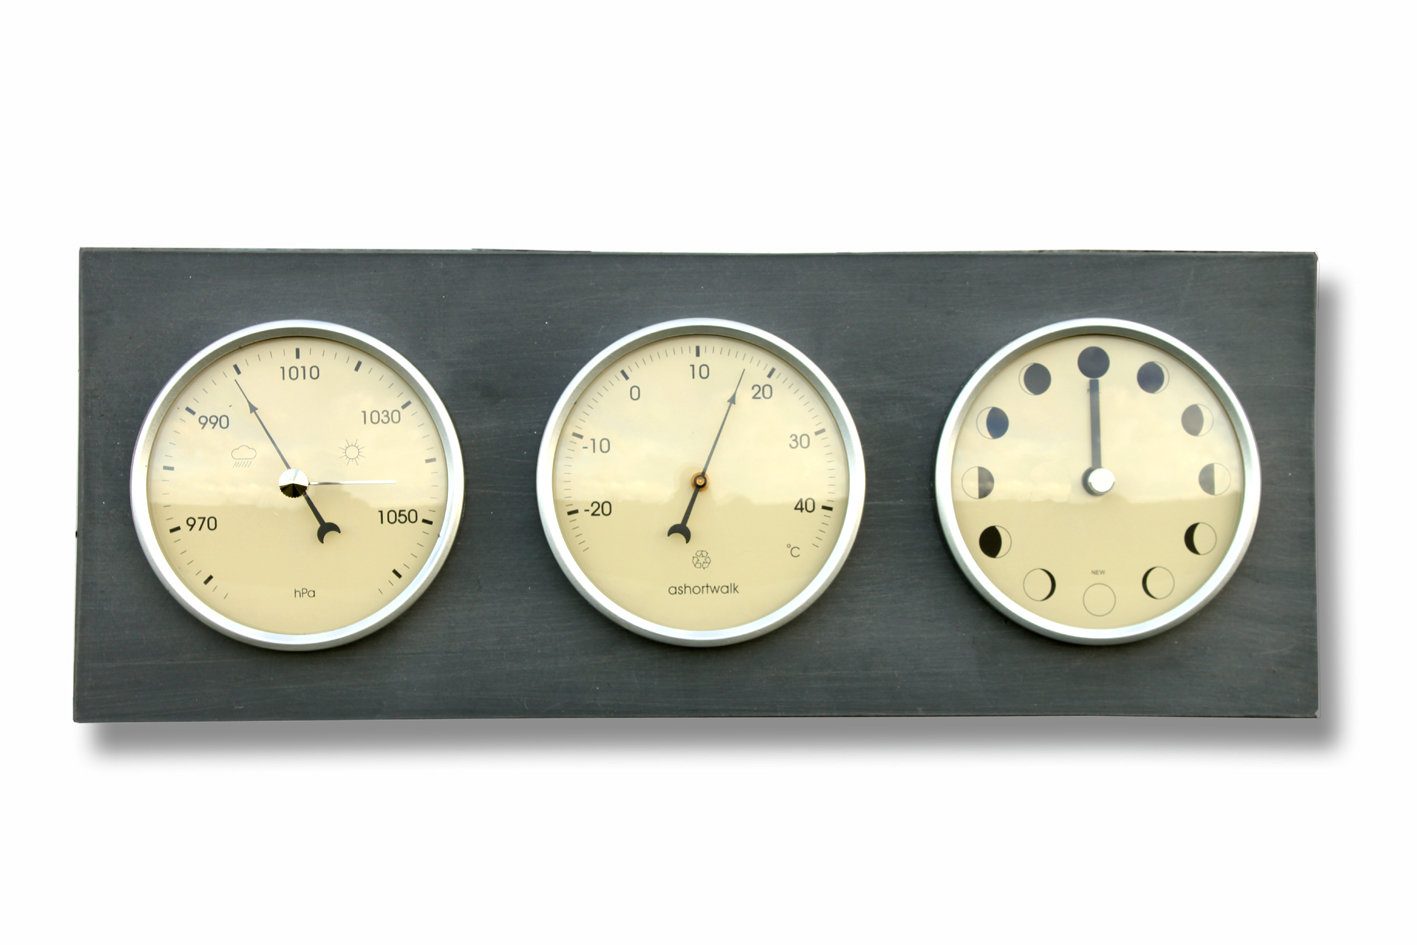 Moon ,Thermometer & Barometer clock made in the UK